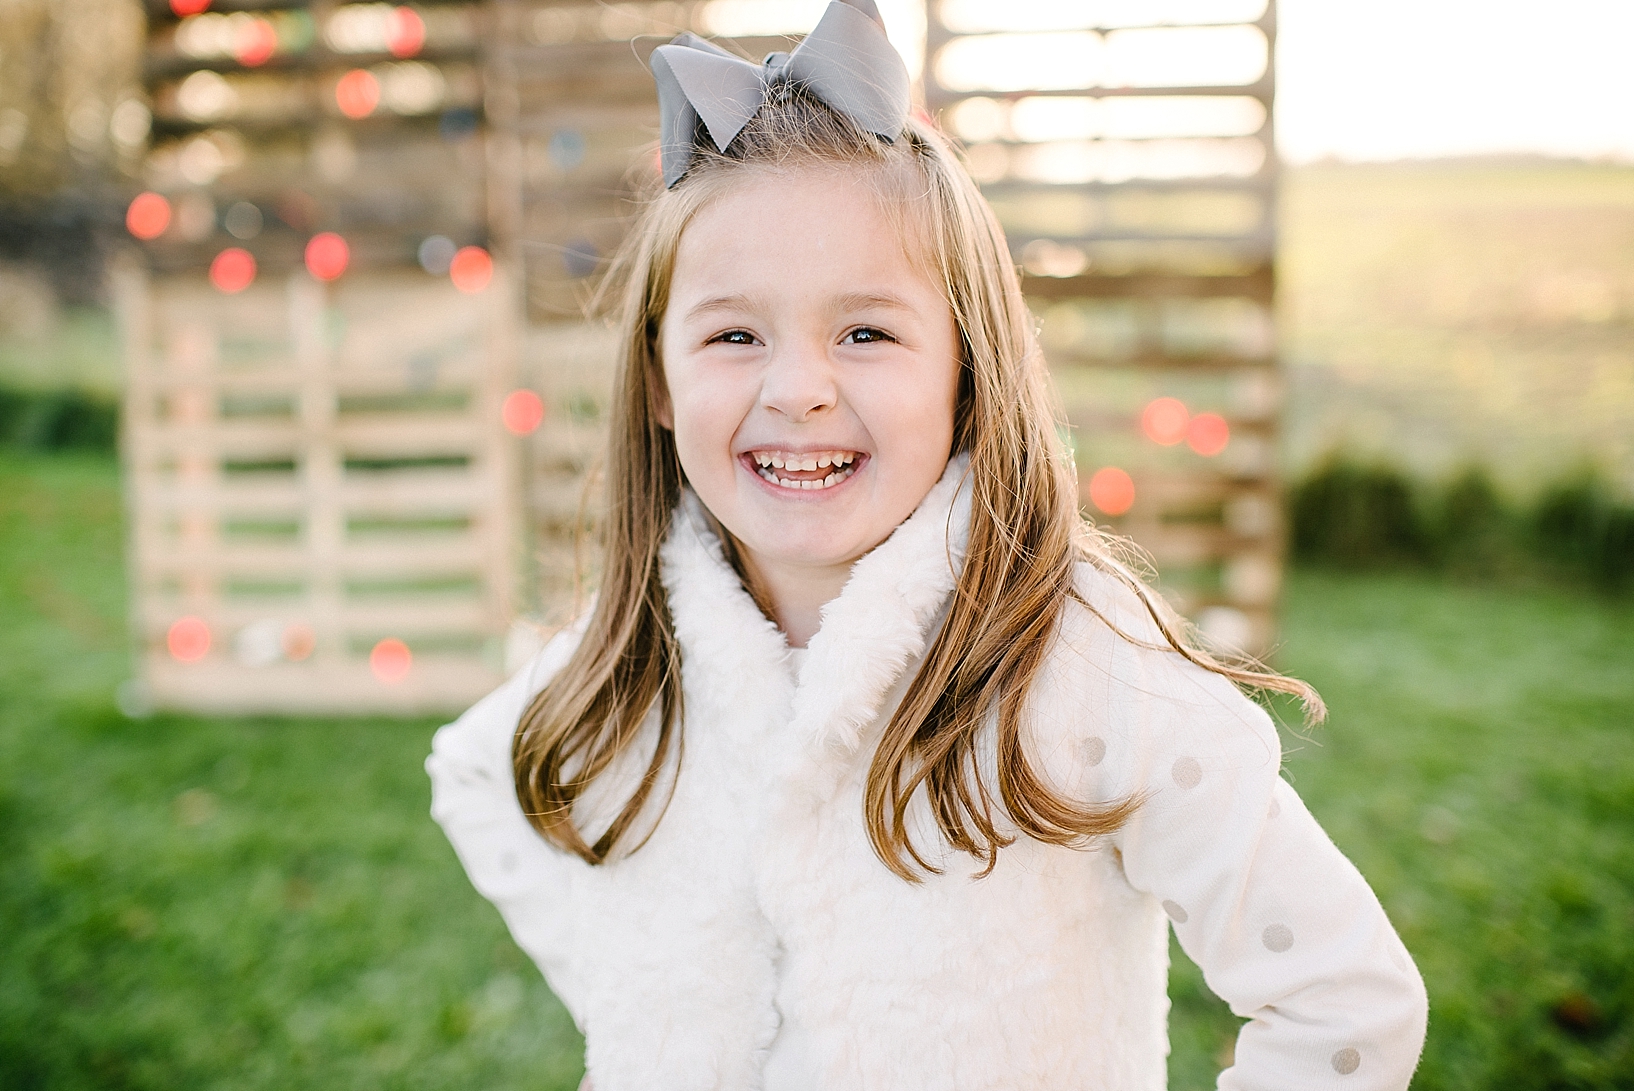 young girl wearing cream sweater standing in front of DIY pallet wall with Christmas lights